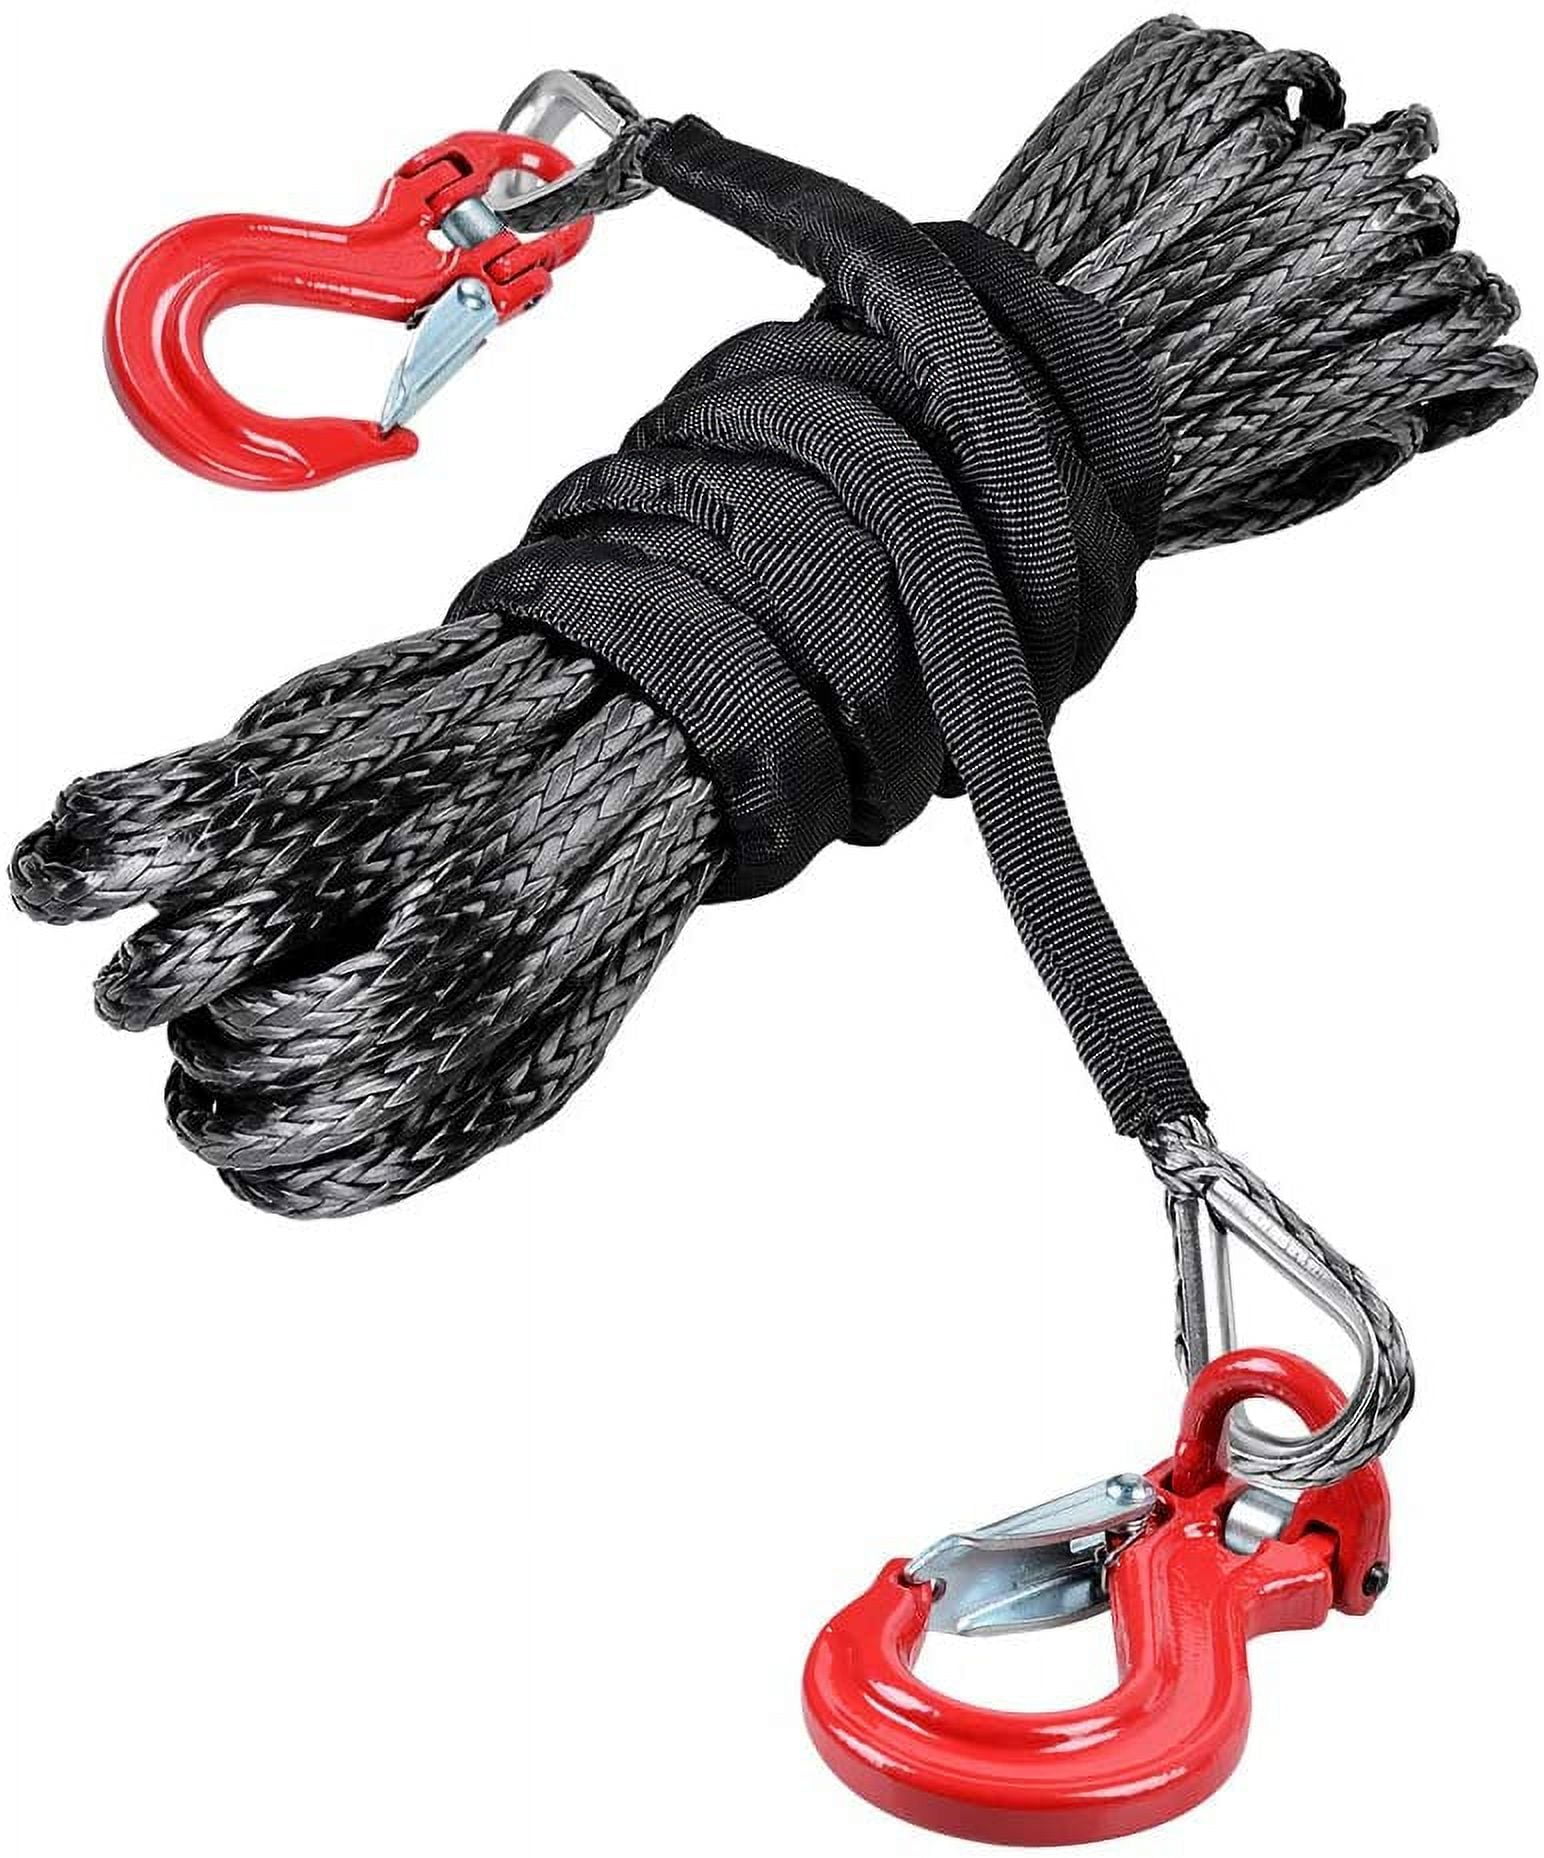 Astra Depot Black 1/4 50ft UHMWPE Winch Rope Extension + 2X RED Clevis  Slip Hook Grade 80 for ATV UTV KFI Car 4X4 Recovery Vehicle 